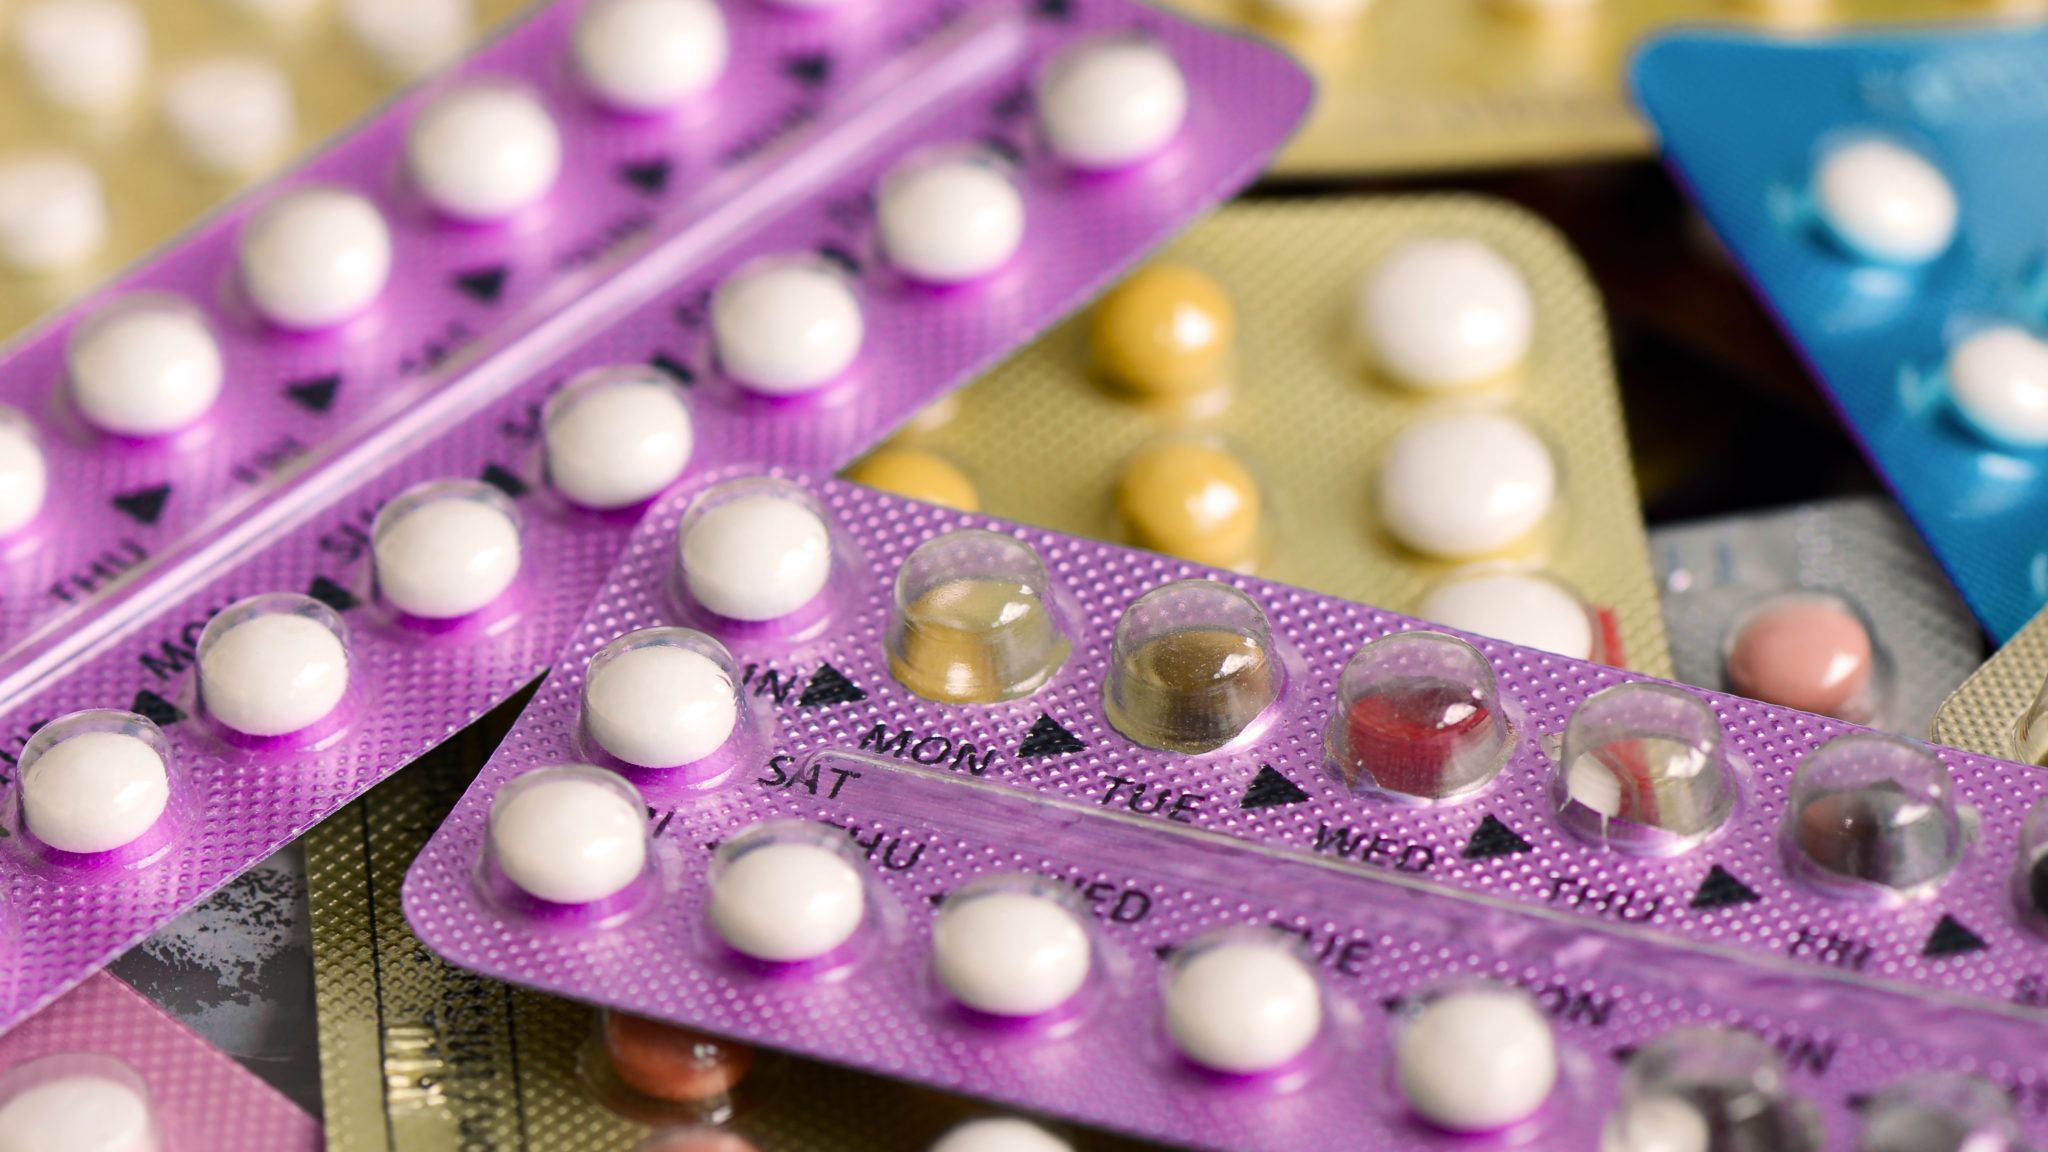 Budget 2023 extends free contraception plan to women under 30